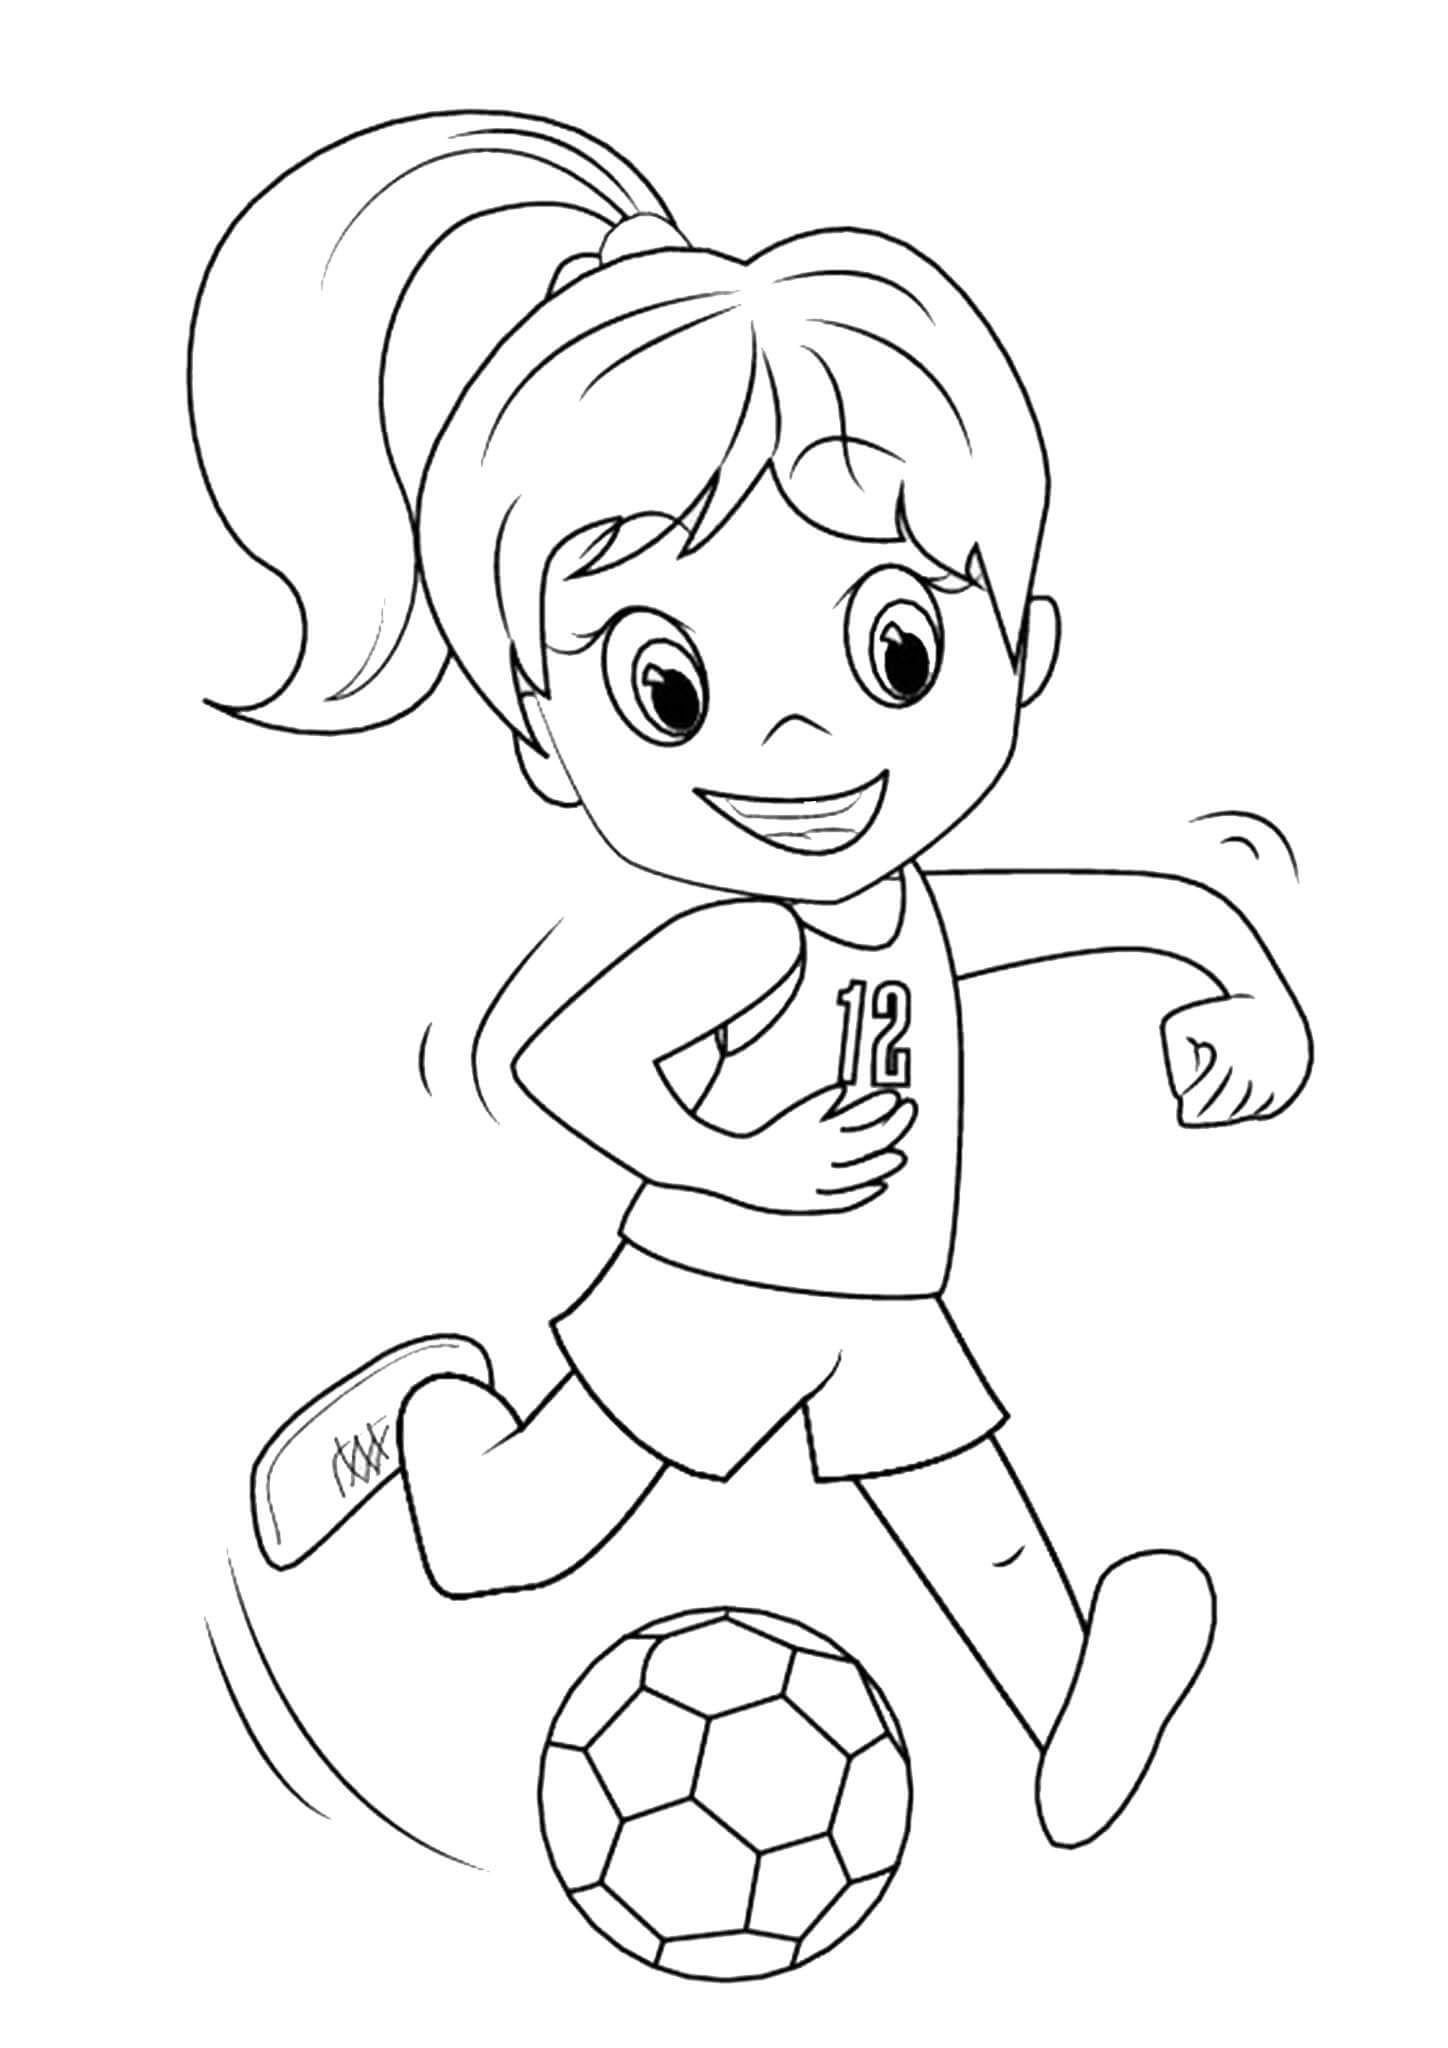 On sports for kids #16